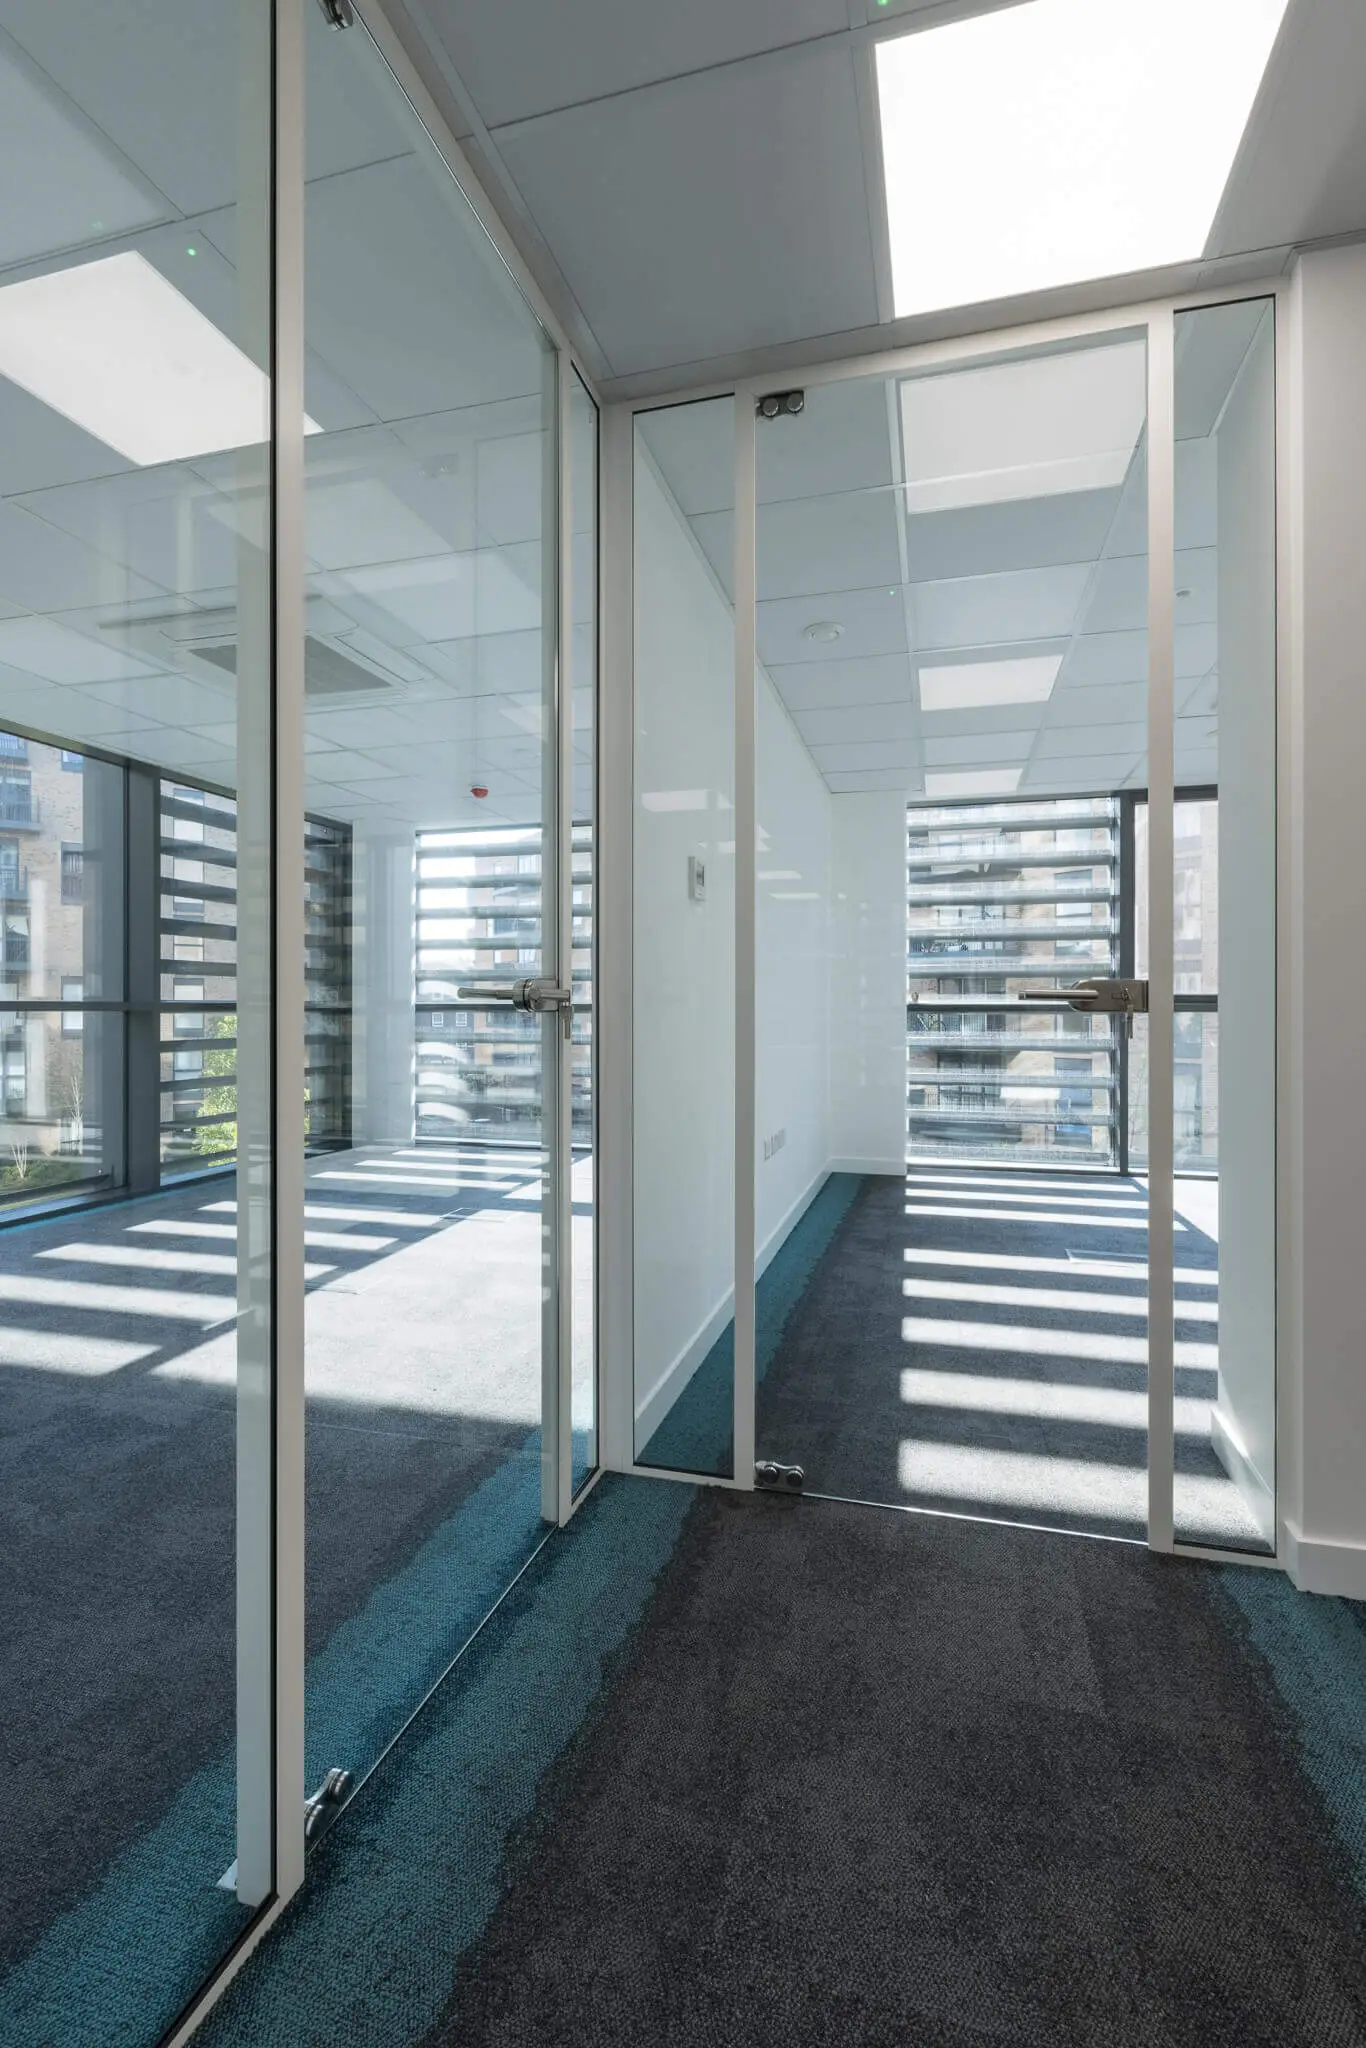 Office space lobby with framed glass doors and designer floors